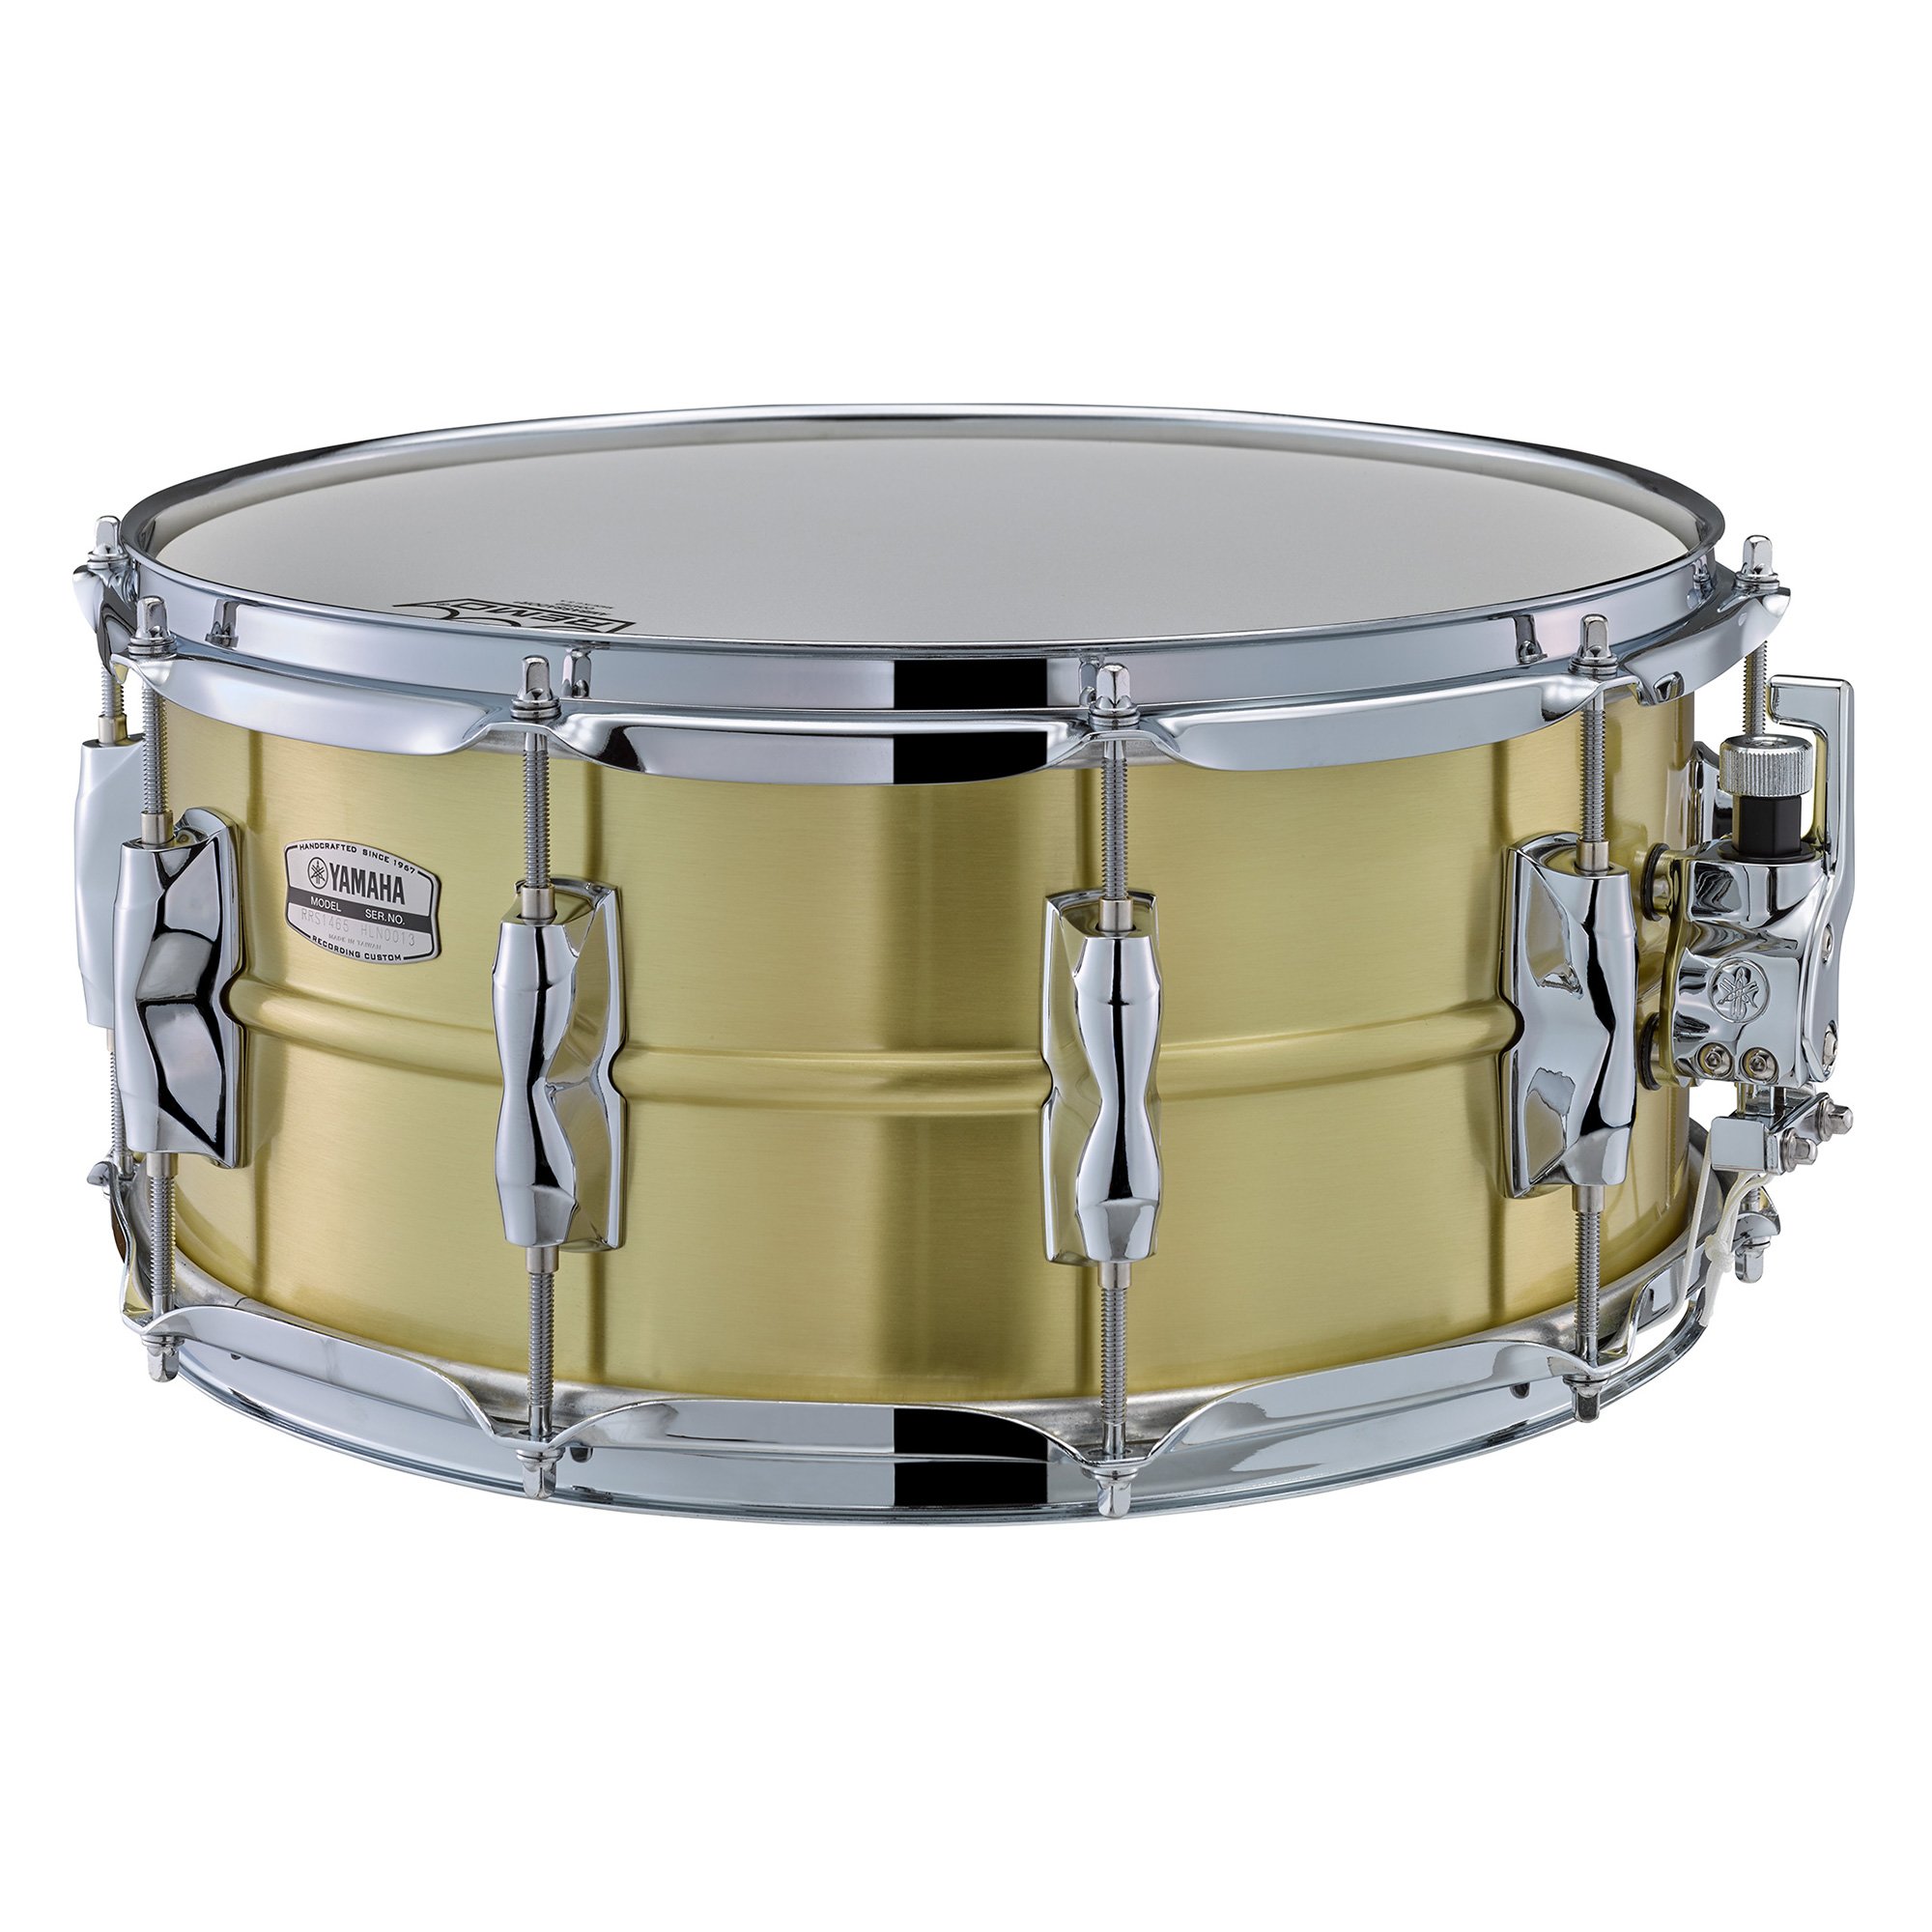 Recording Custom Brass Snare Drums - Overview - Snare Drums